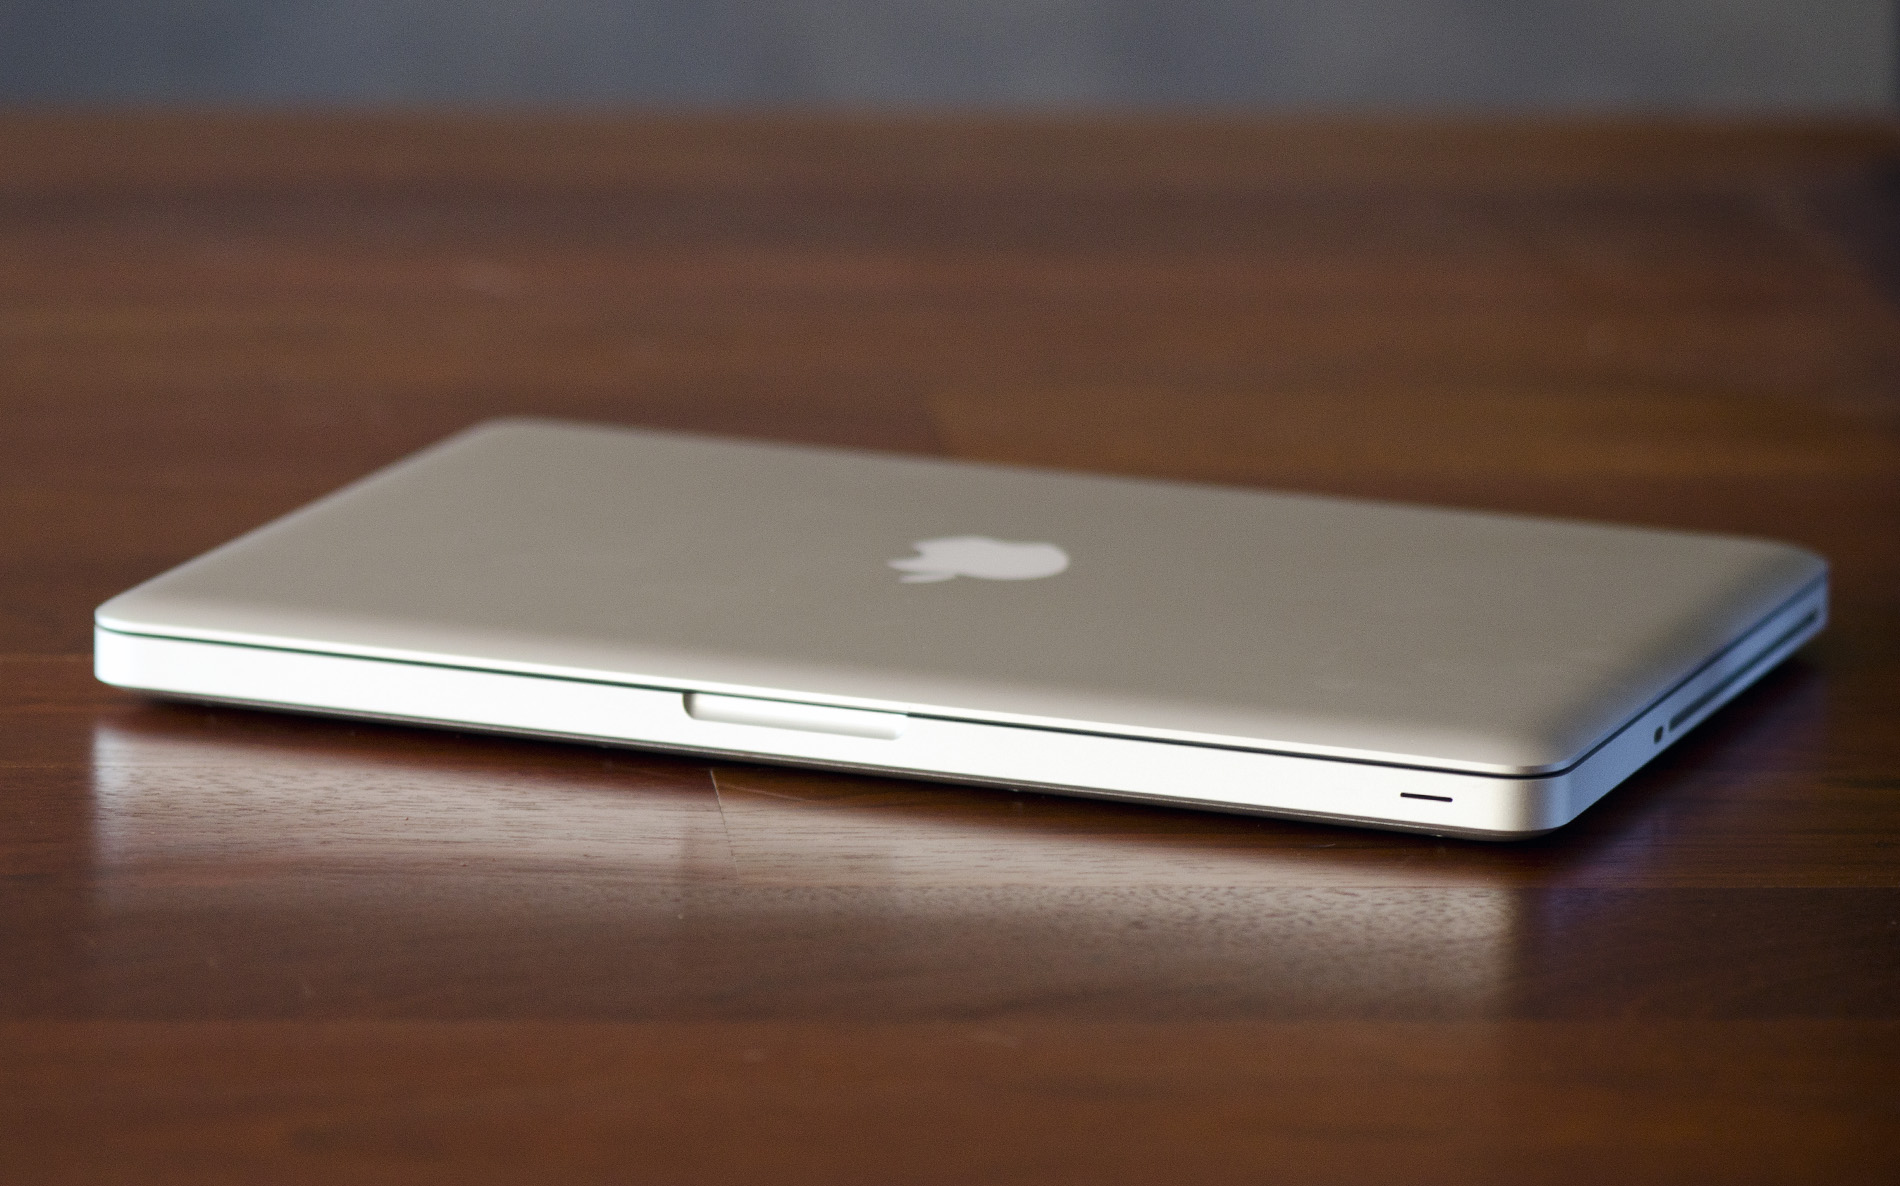 Battery Life - The MacBook Pro Review (13 & 15-inch): 2011 Brings 